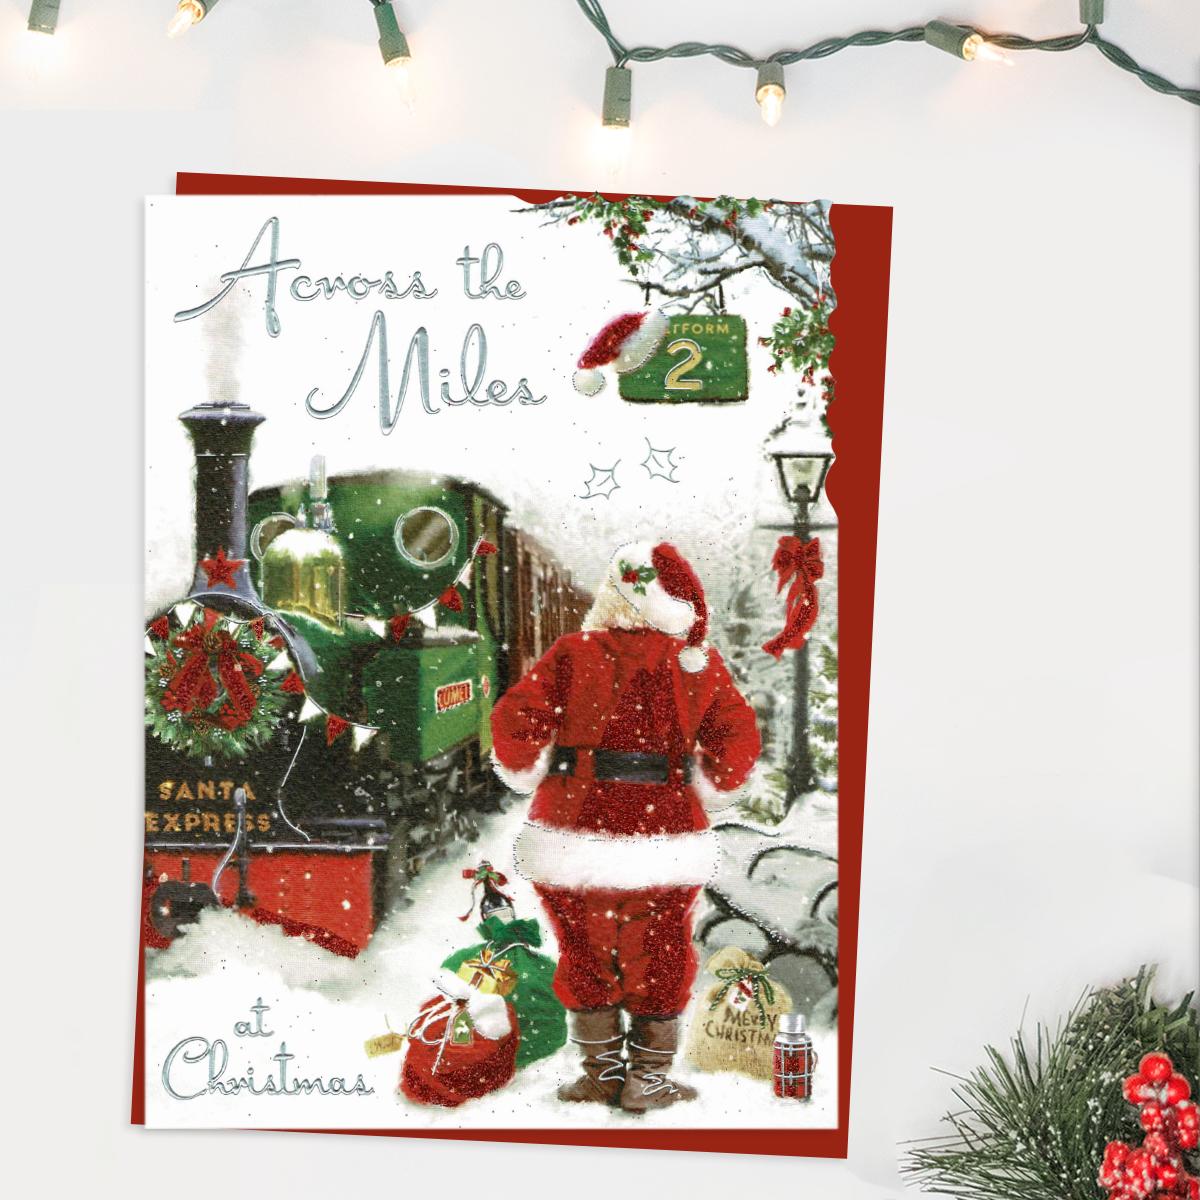 Across The Miles Santa Express Card Front Image